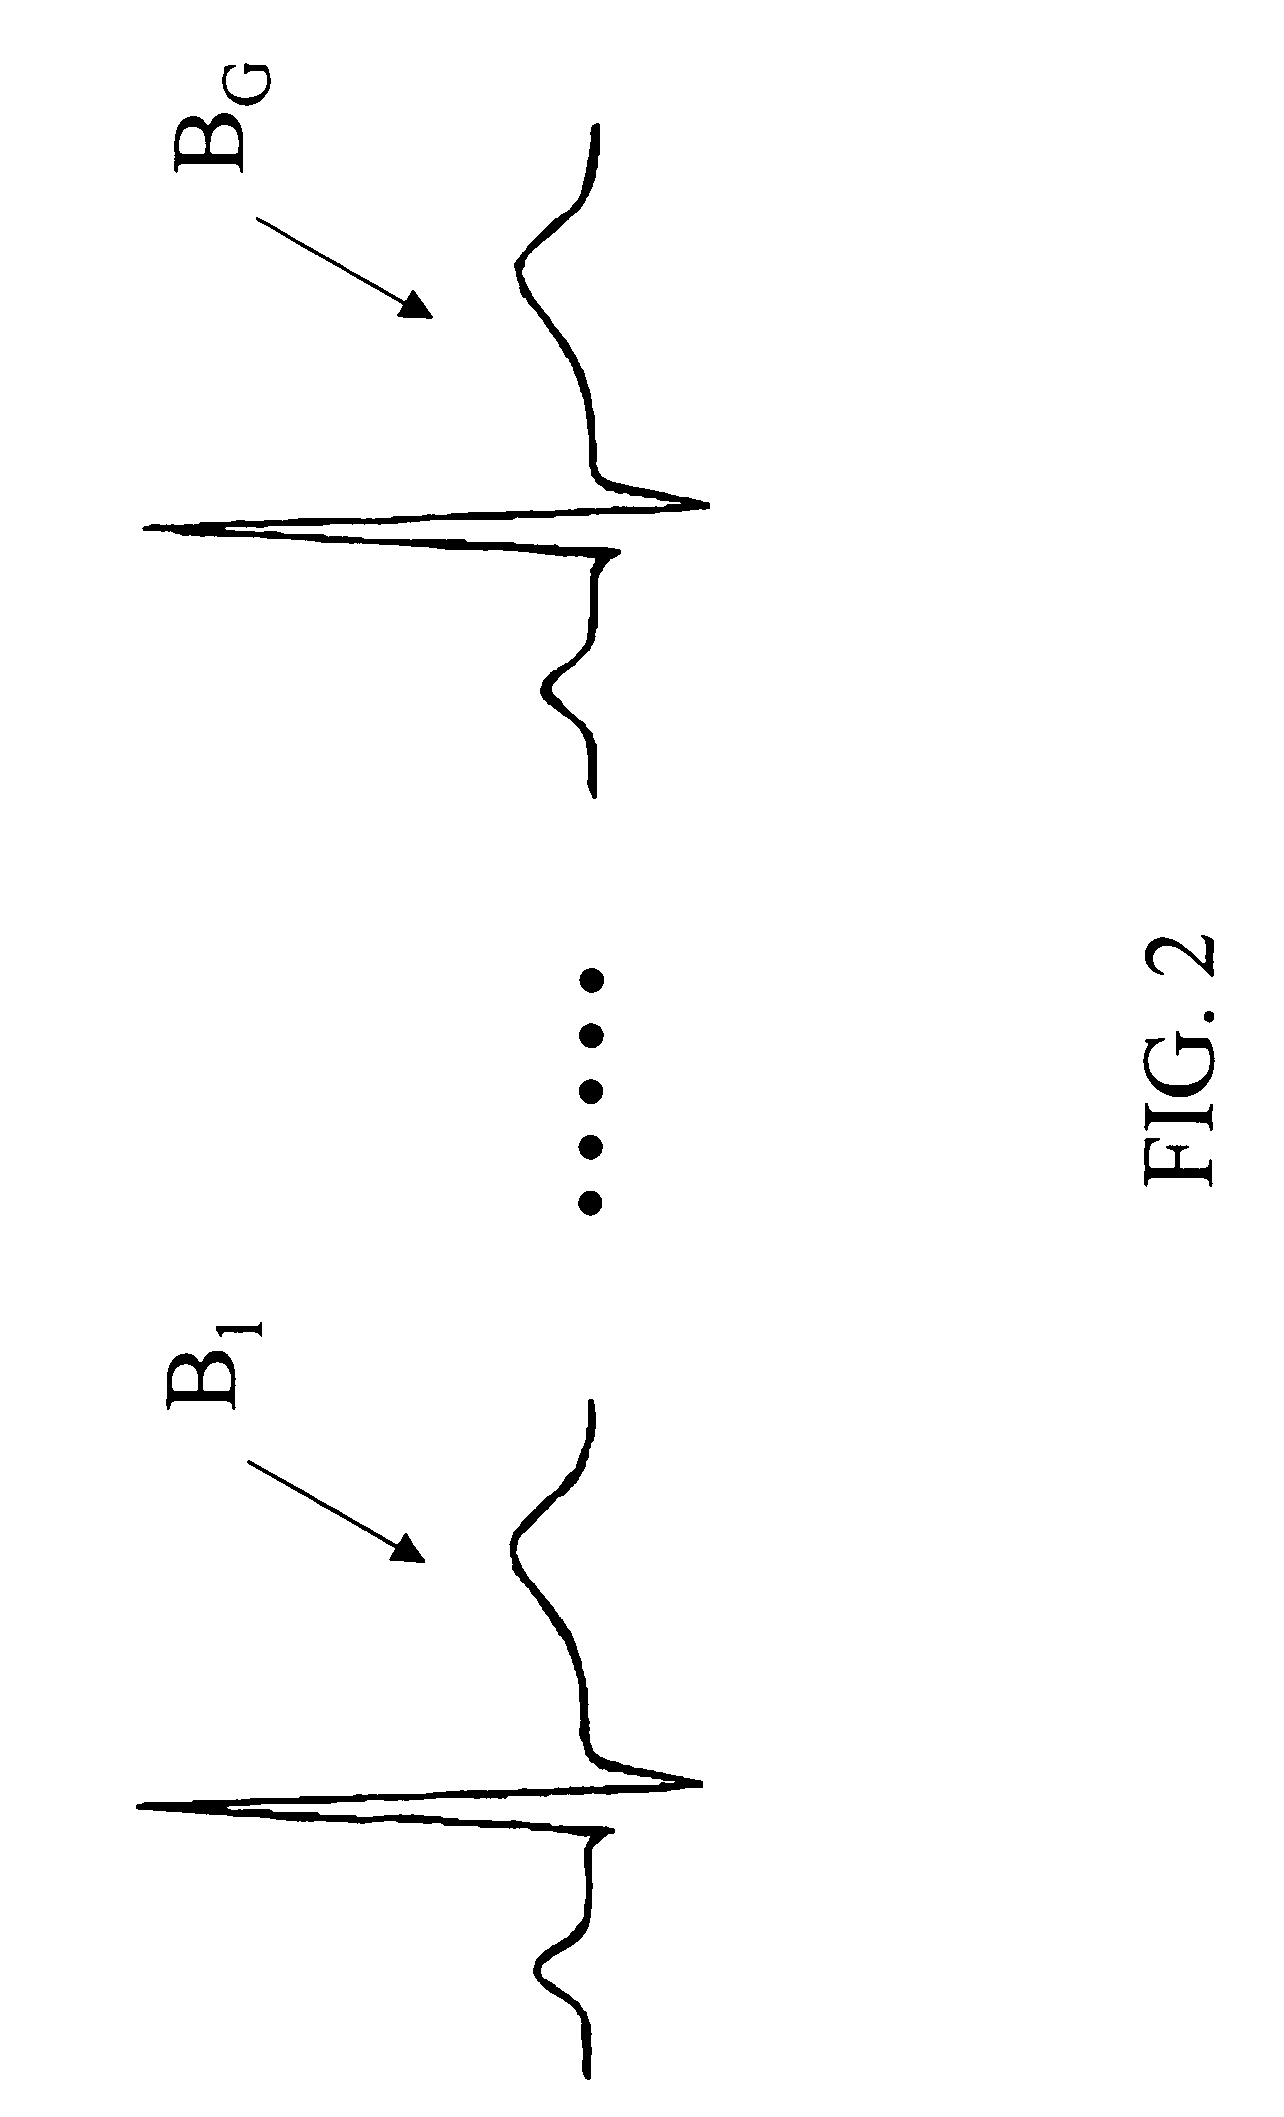 Method and apparatus for determining alternans data of an ECG signal